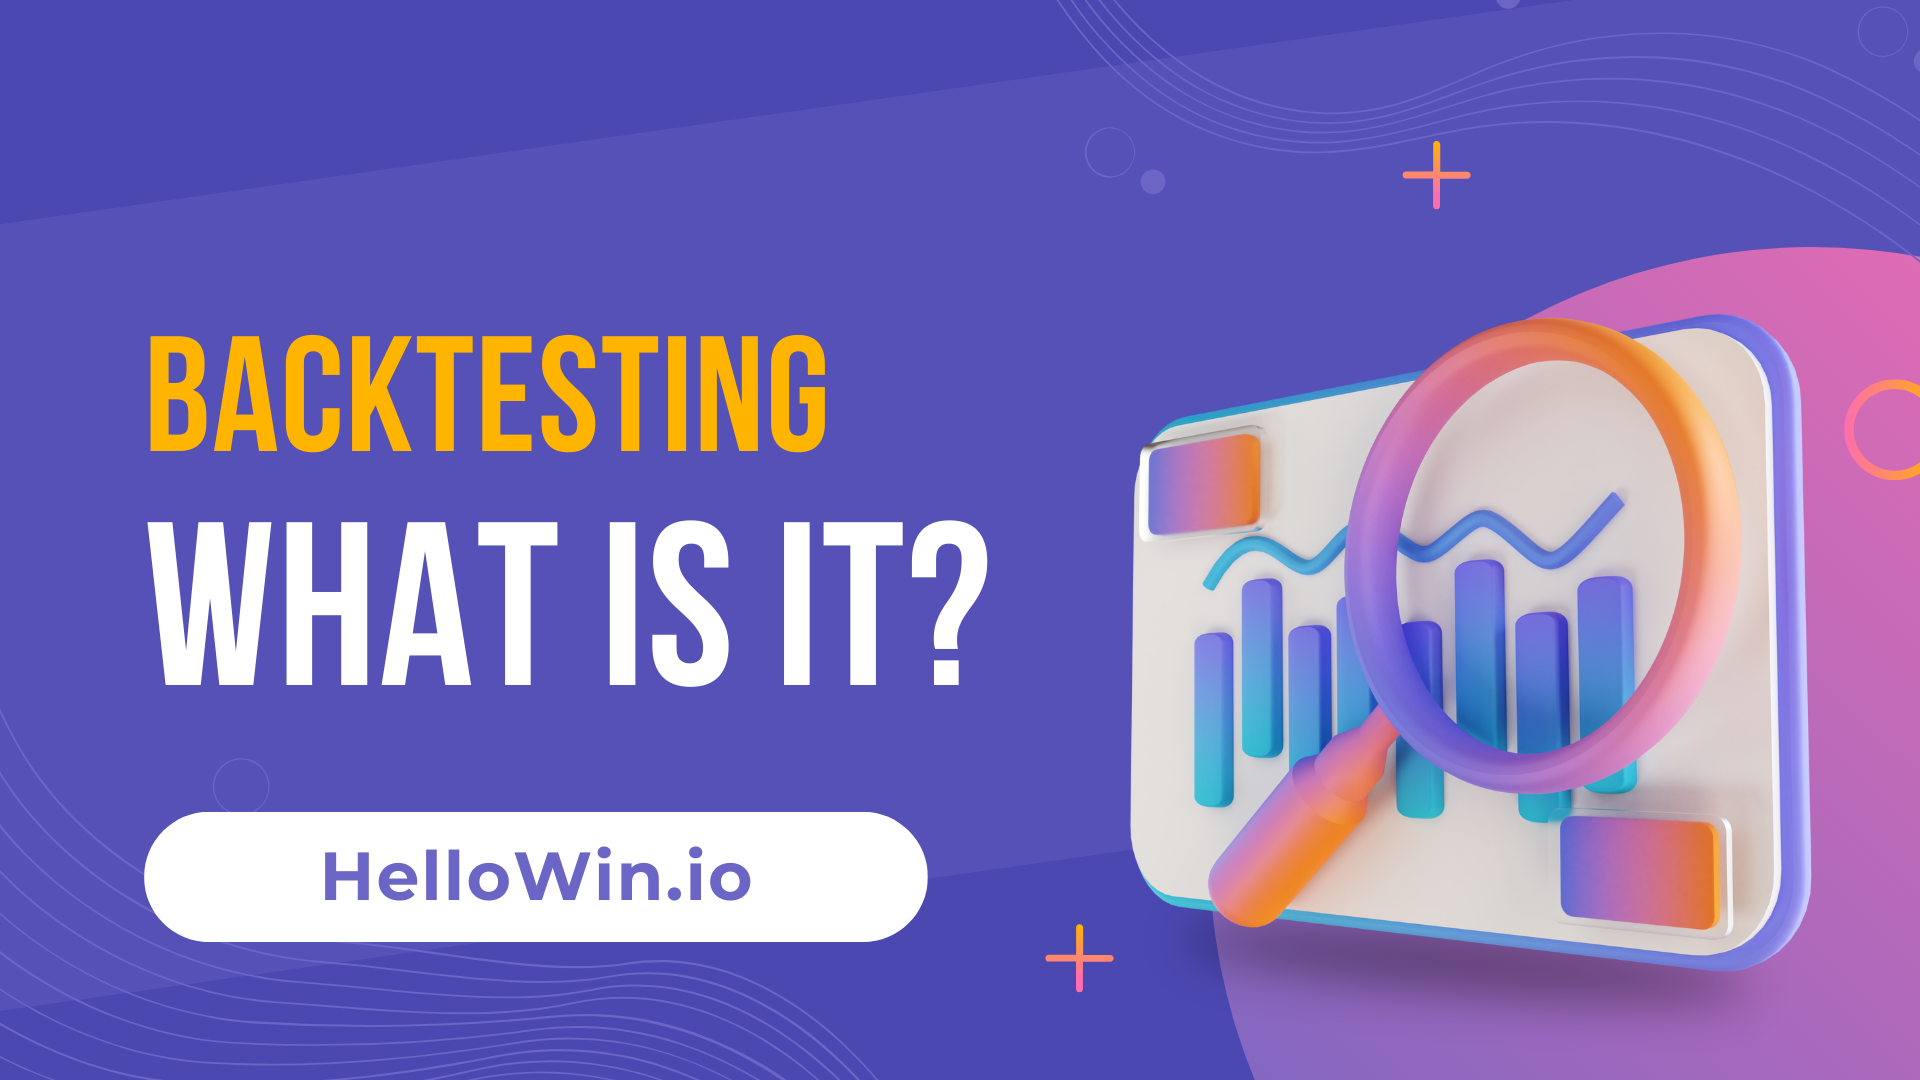 Hellowin.io What is backtesting